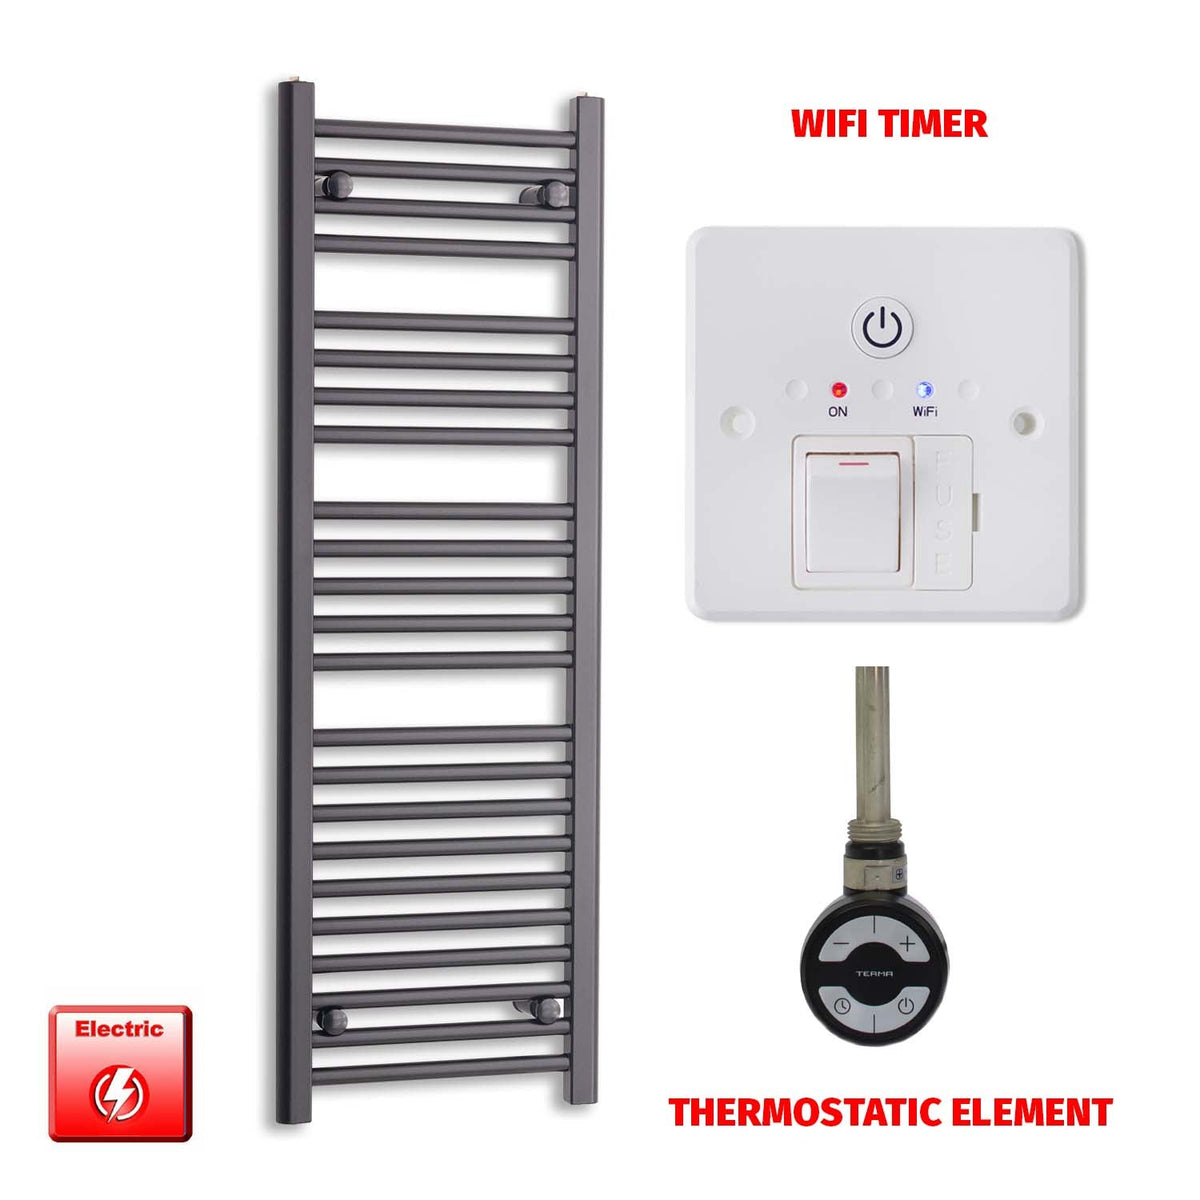 1200 x 400 Flat Black Pre-Filled Electric Heated Towel Rail Radiator HTR MOA Thermostatic Wifi Timer